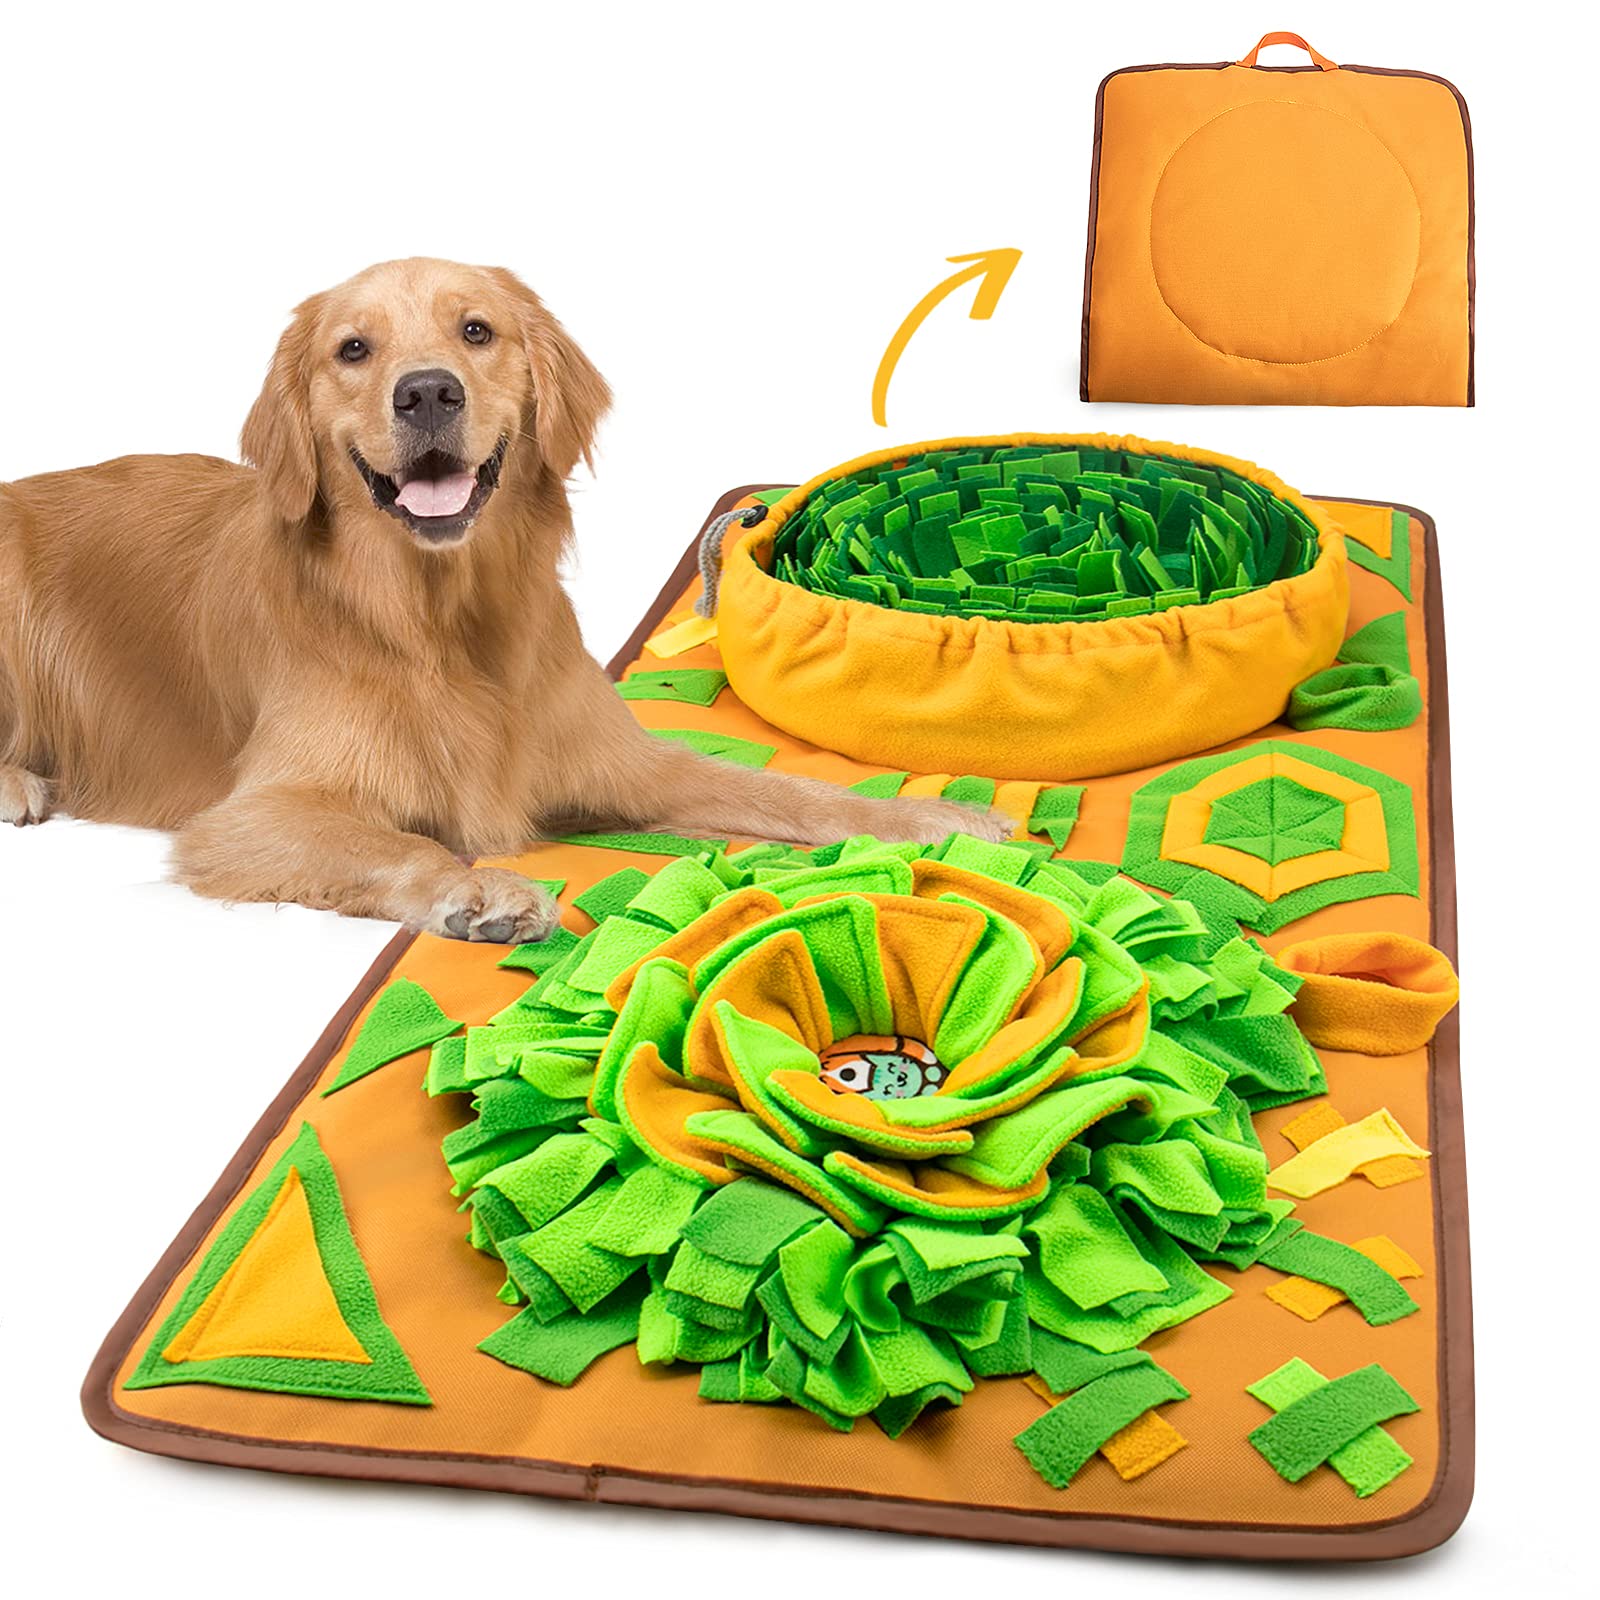 AWOOF Snuffle Mat for Dogs, Sniff Mat Interactive Dog Puzzle Toys,  Enrichment Snuffle Mats Feed Games Encourages Natural Foraging Skills  Mental Stimulation for Dogs Stress Relief 34.6x19.6